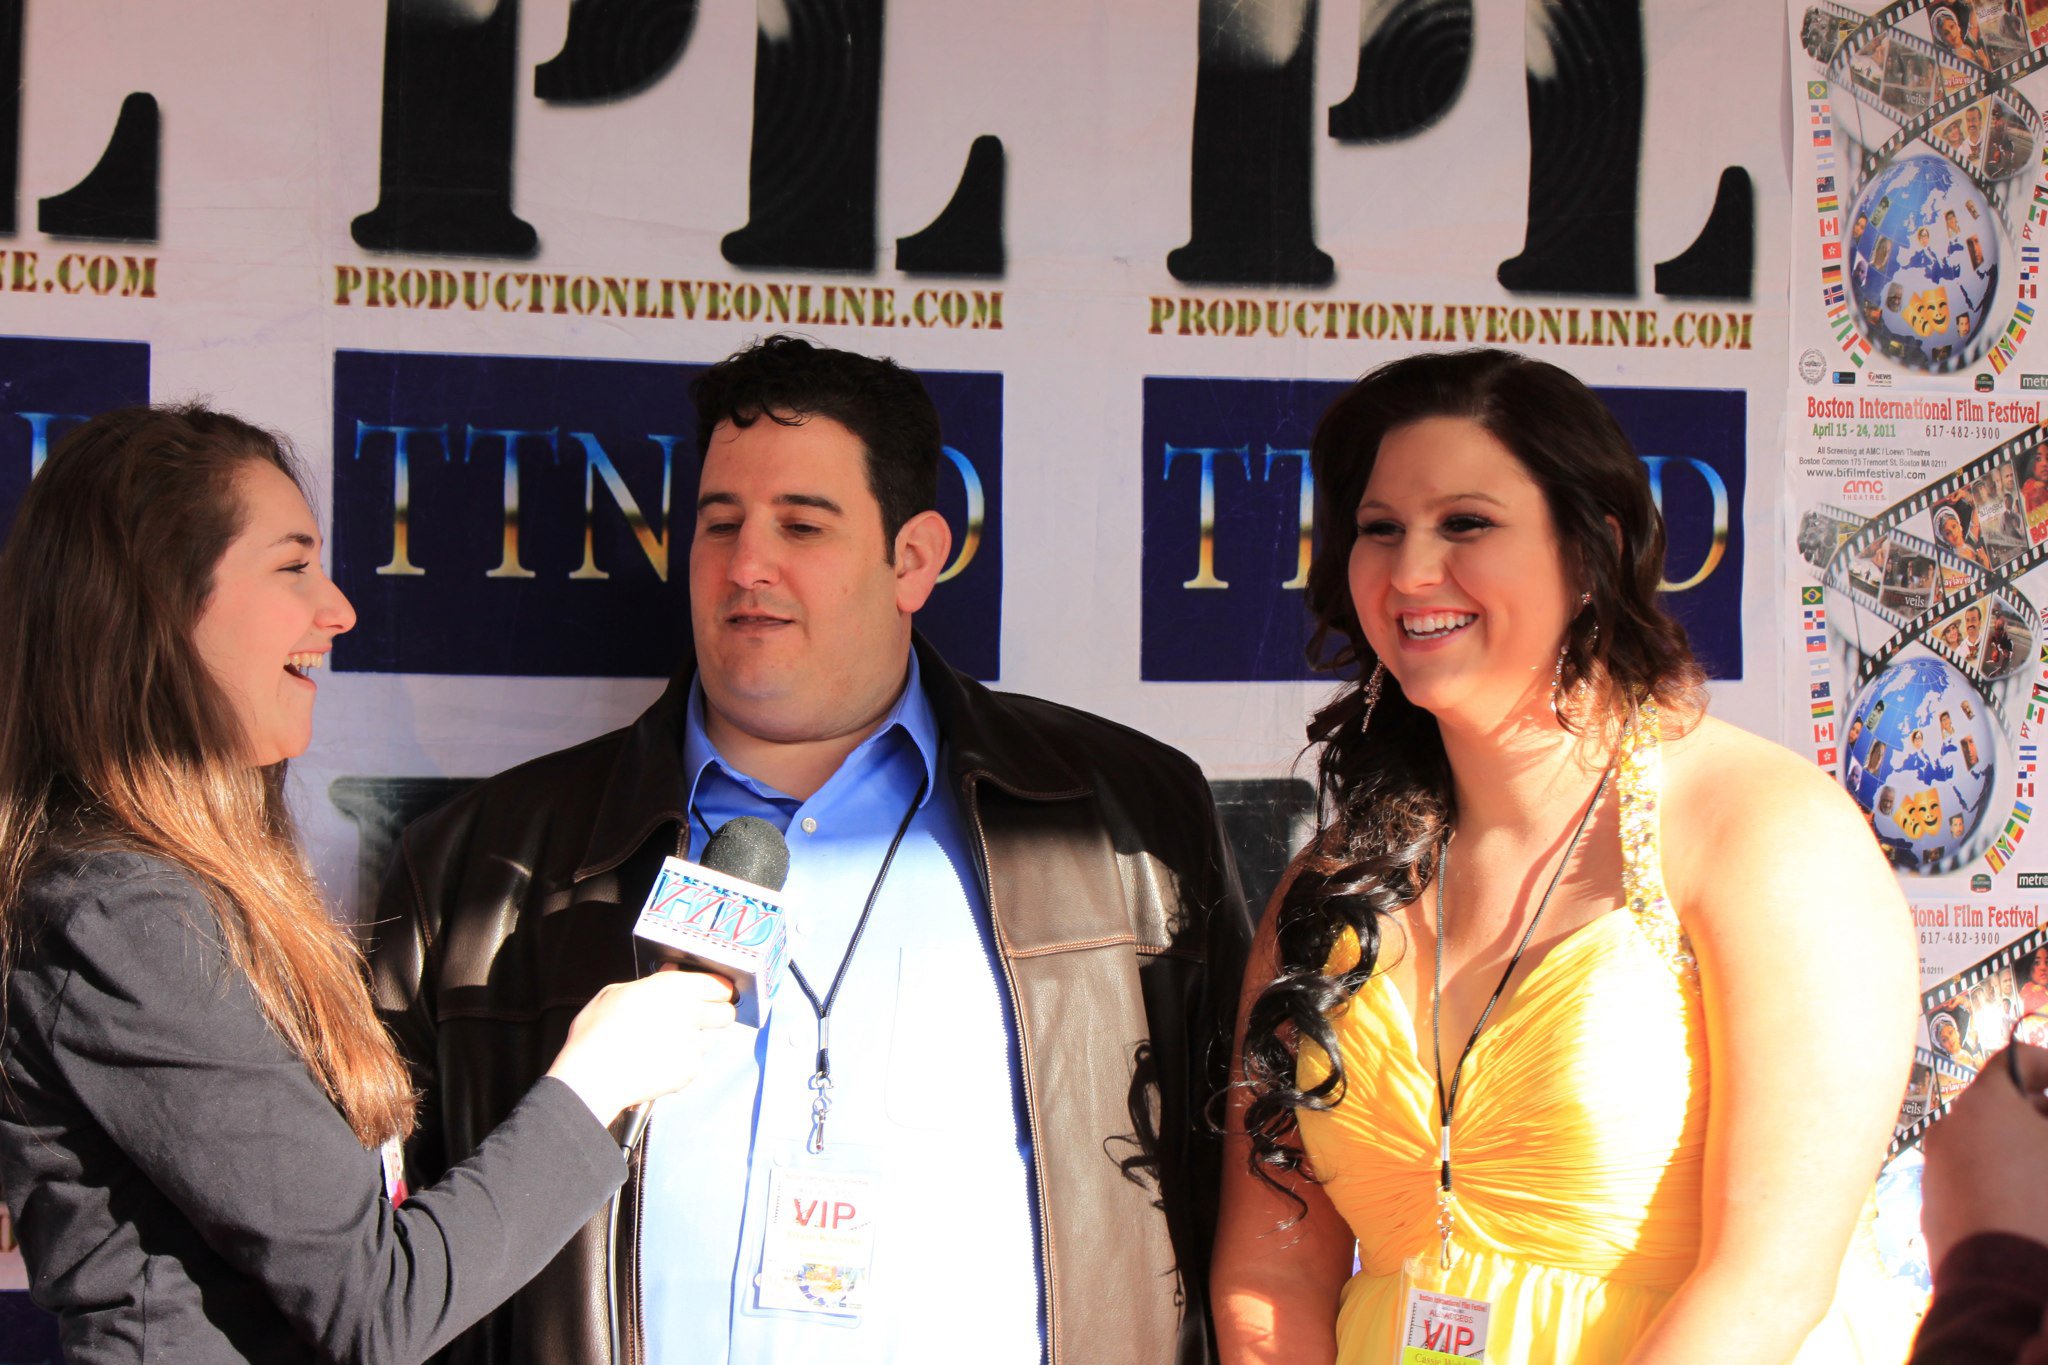 Cassie Webber on the Red Carpet, being interviewed at the Boston International Film Festival 2011